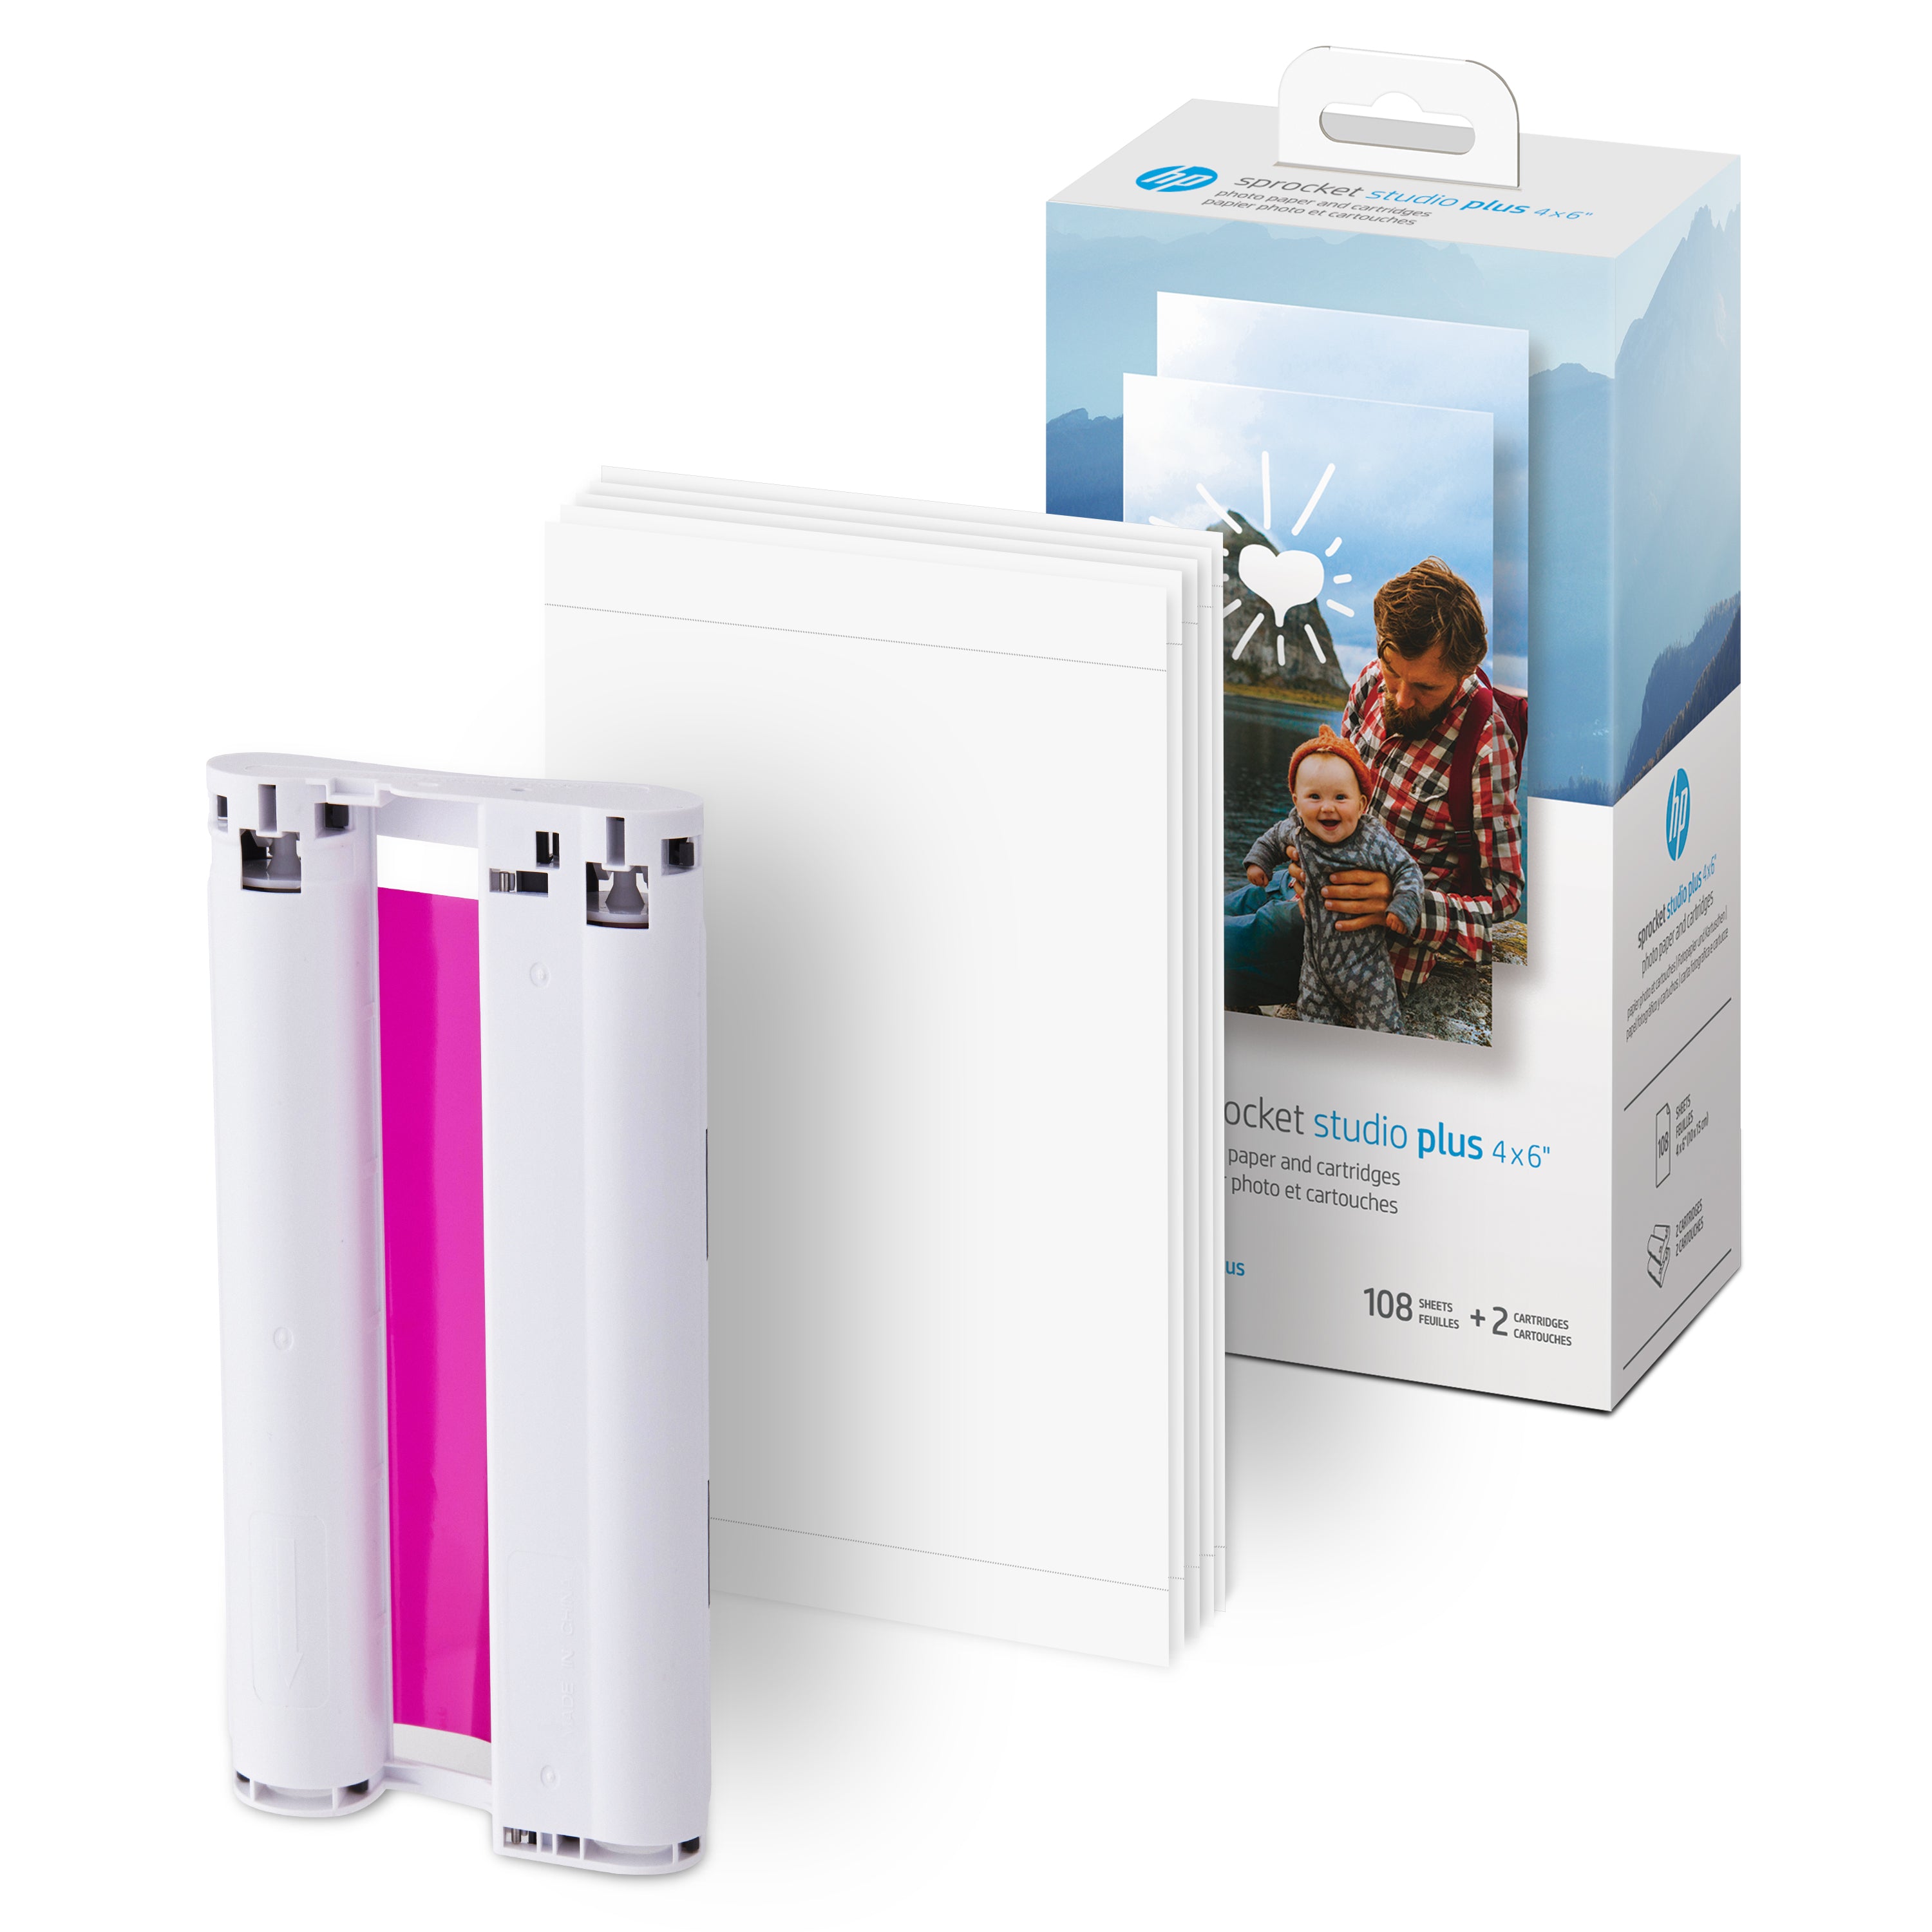 HP Sprocket Studio Plus 4 x 6” Photo Paper and Cartridges (Includes 324 Sheets and 6 Cartridges) – Compatible only with HP Sprocket Studio Plus printer Sprocket Printers CA